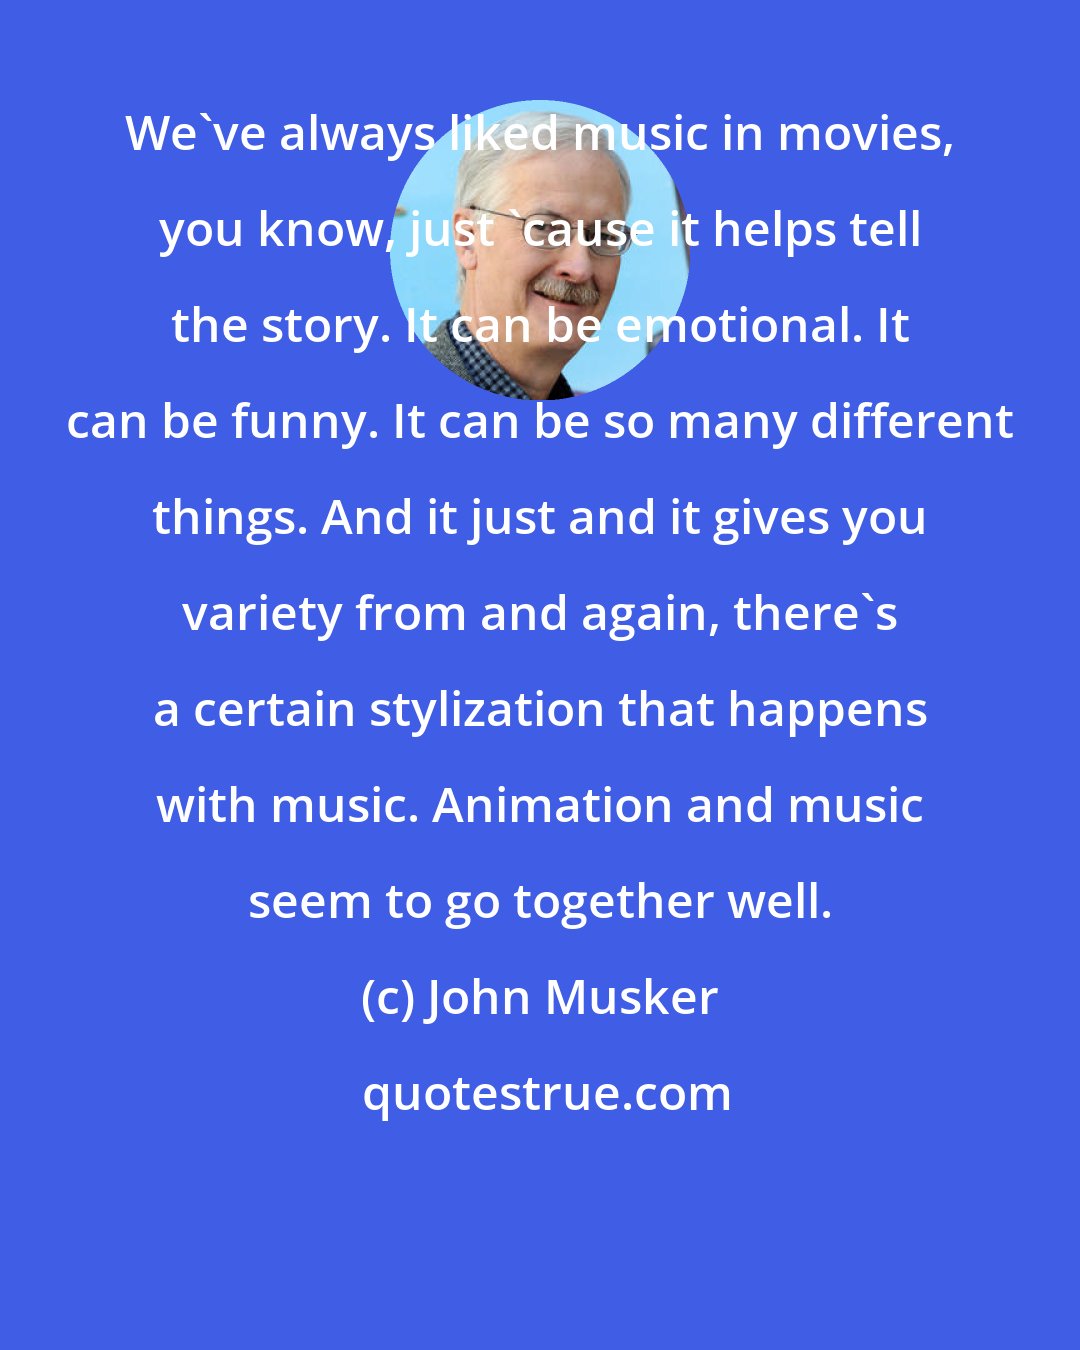 John Musker: We've always liked music in movies, you know, just 'cause it helps tell the story. It can be emotional. It can be funny. It can be so many different things. And it just and it gives you variety from and again, there's a certain stylization that happens with music. Animation and music seem to go together well.